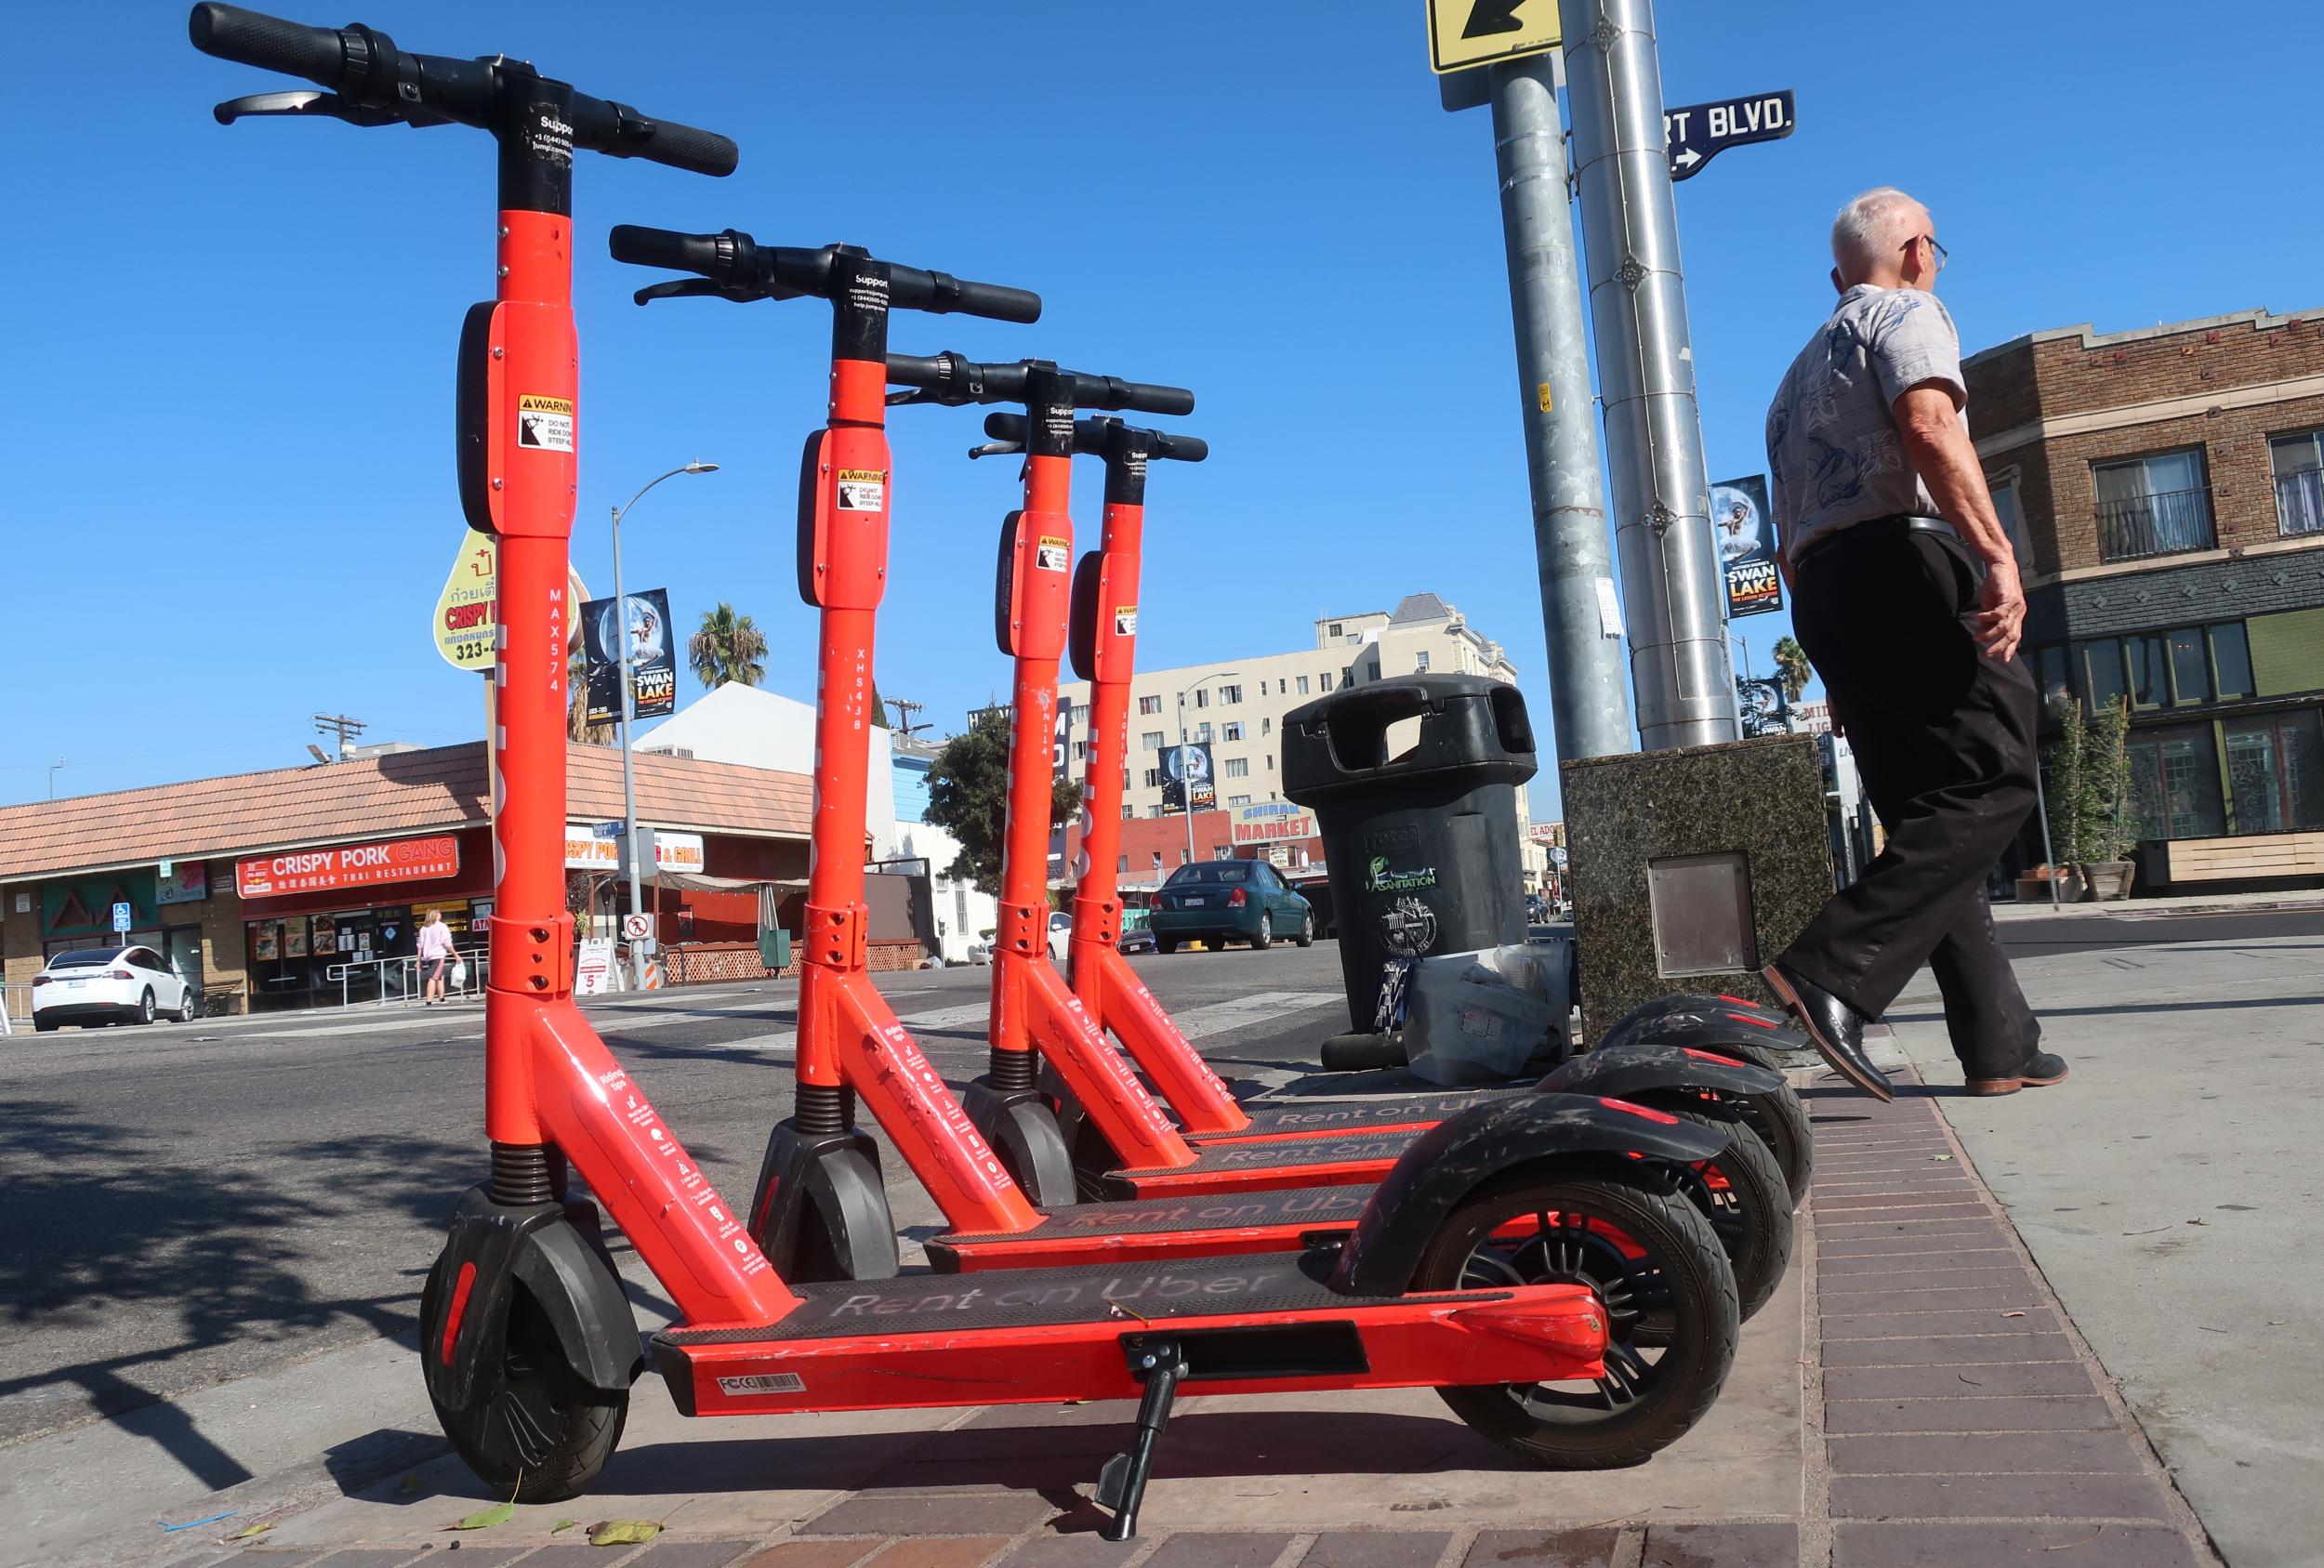 E-scooters’ growth in popularity can be seen as part of a growing interest in micromobility (Getty)